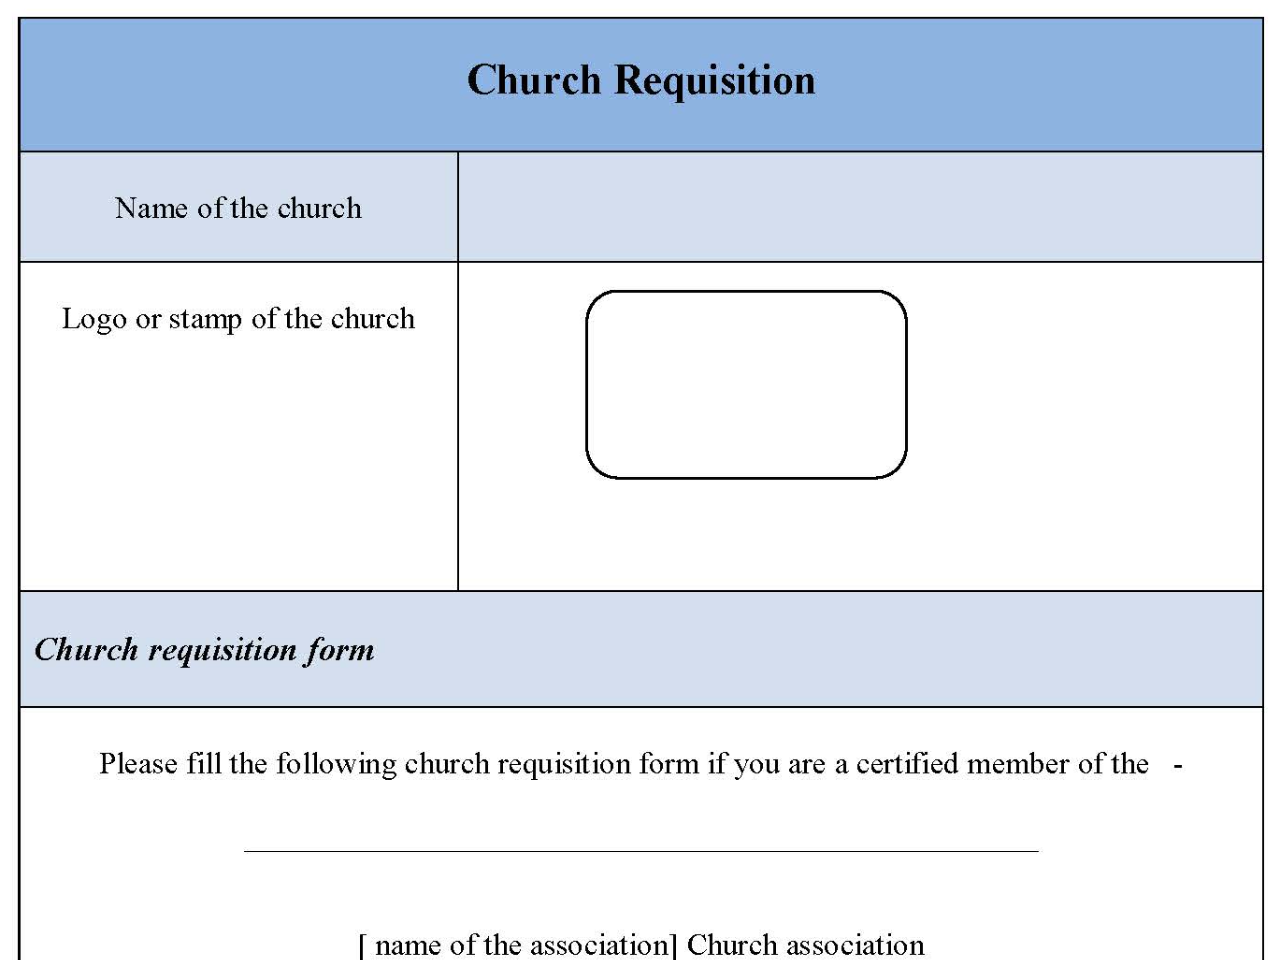 Church Requisition Form